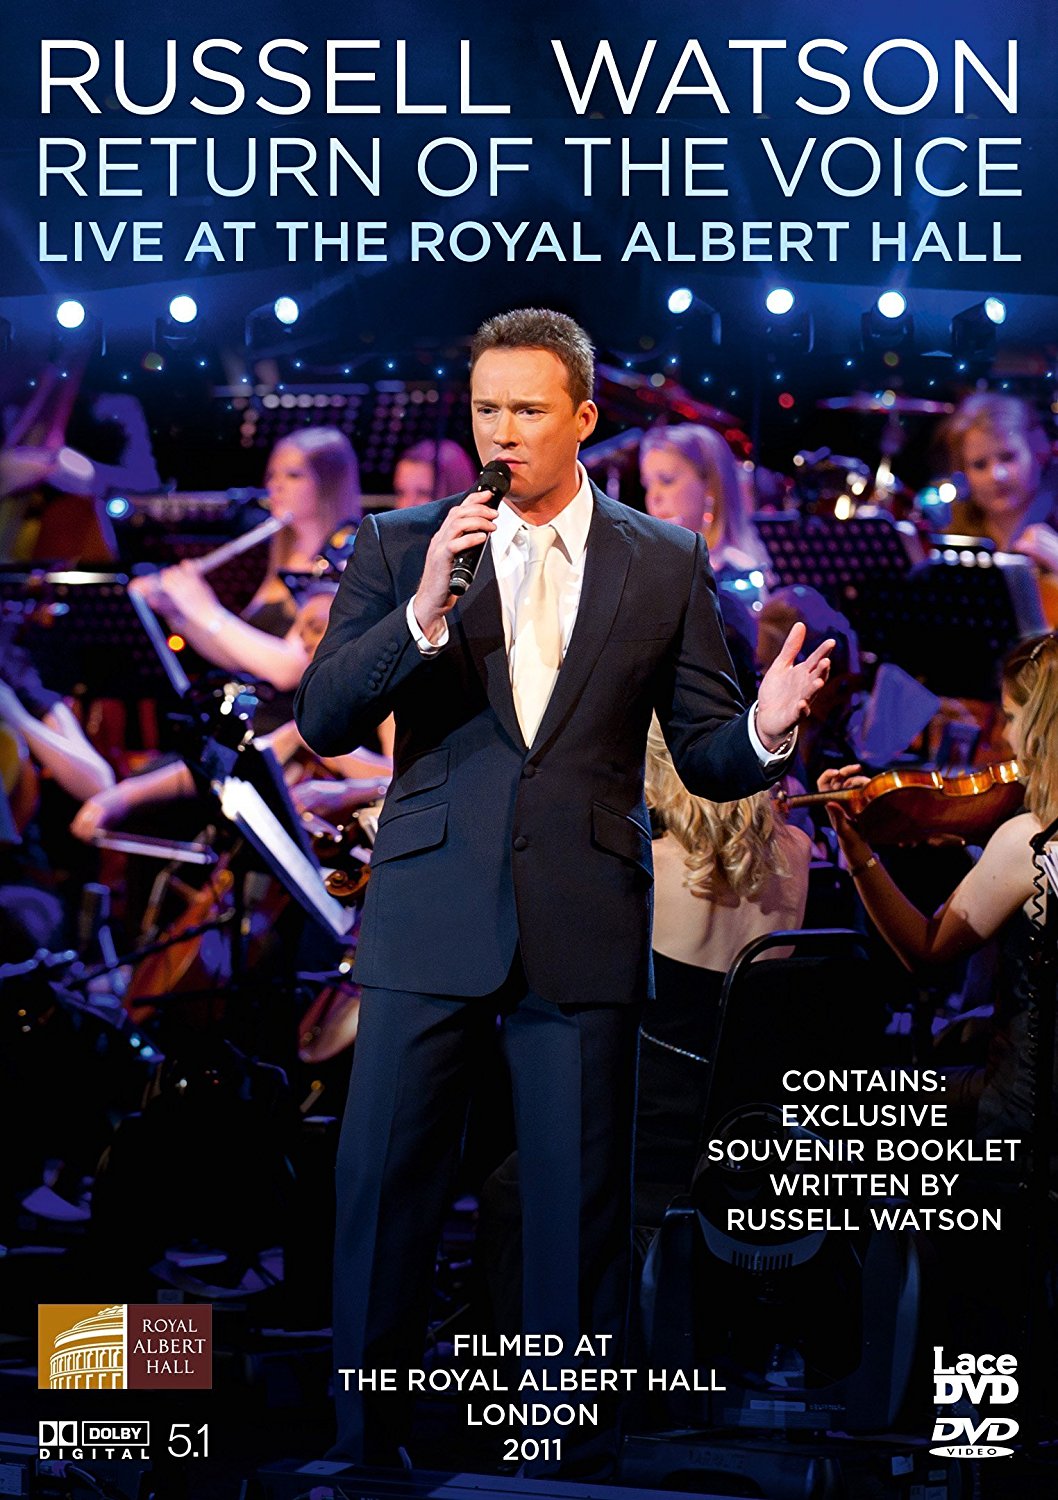 Russell Watson Return Of The Voice - Live From The Royal Albert Hall (DVD)